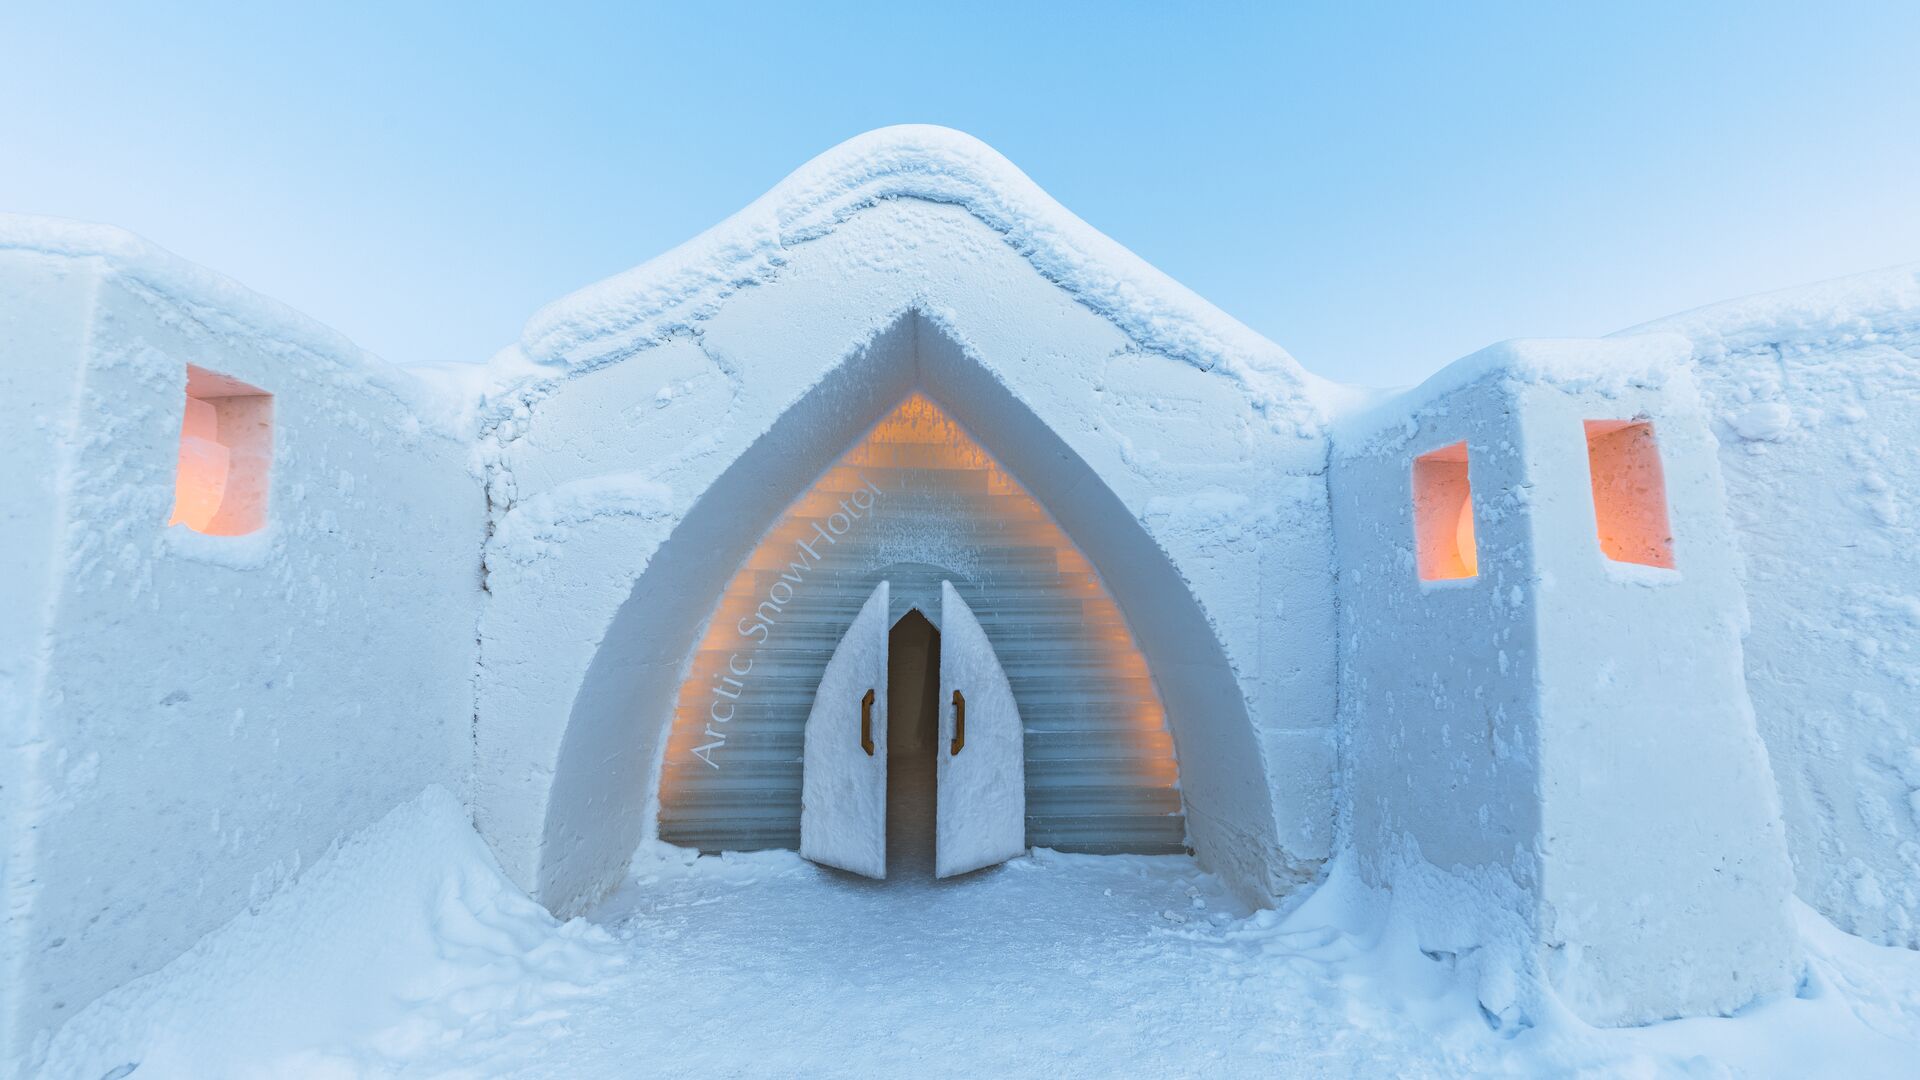 The Arctic SnowHotel ©Arctic SnowHotel & Glass Igloos